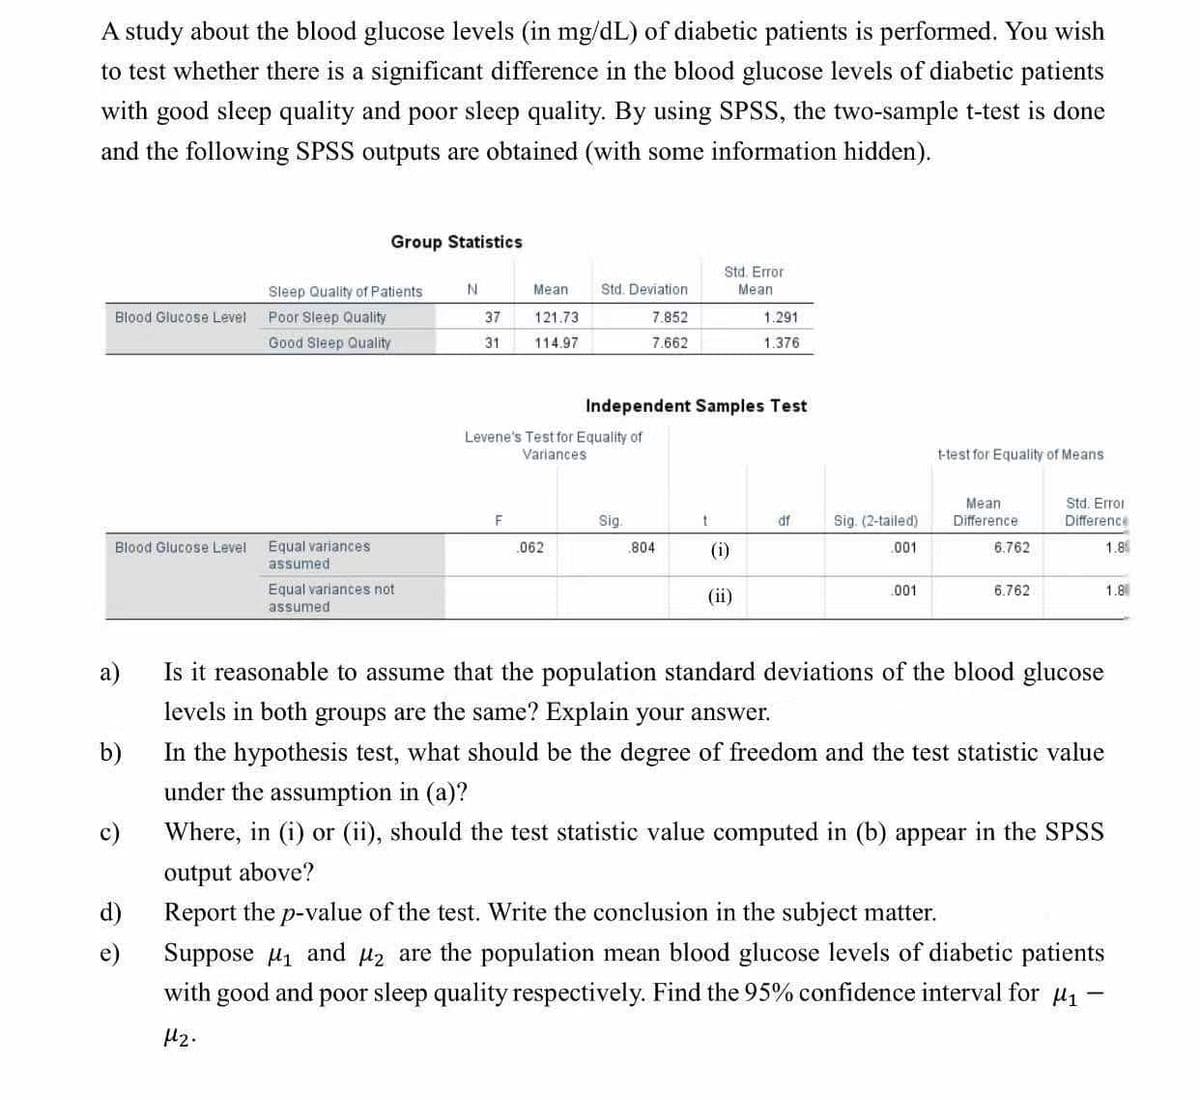 A study about the blood glucose levels (in mg/dL) of diabetic patients is performed. You wish
to test whether there is a significant difference in the blood glucose levels of diabetic patients
with good sleep quality and poor sleep quality. By using SPSS, the two-sample t-test is done
and the following SPSS outputs are obtained (with some information hidden).
Blood Glucose Level
Blood Glucose Level
c)
d)
e)
Group Statistics
Sleep Quality of Patients:
Poor Sleep Quality
Good Sleep Quality
Equal variances
assumed
Equal variances not
assumed
N
37
31
Meant
121.73
114.97
F
Std. Deviation
7.852
7.662
Levene's Test for Equality of
Variances
062
Independent Samples Test
Sig.
.804
Std. Error
Mean
t
(i)
1.291
1.376
(ii)
df
Sig. (2-tailed)
.001
.001
t-test for Equality of Means
Mean
Difference
6.762
6.762
Std. Error
Difference
1.8
a)
Is it reasonable to assume that the population standard deviations of the blood glucose
levels in both groups are the same? Explain your answer.
b)
In the hypothesis test, what should be the degree of freedom and the test statistic value
under the assumption in (a)?
Where, in (i) or (ii), should the test statistic value computed in (b) appear in the SPSS
output above?
Report the p-value of the test. Write the conclusion in the subject matter.
Suppose ₁ and ₂ are the population mean blood glucose levels of diabetic patients
with good and poor sleep quality respectively. Find the 95% confidence interval for μ₁
4₂.
1.8
-